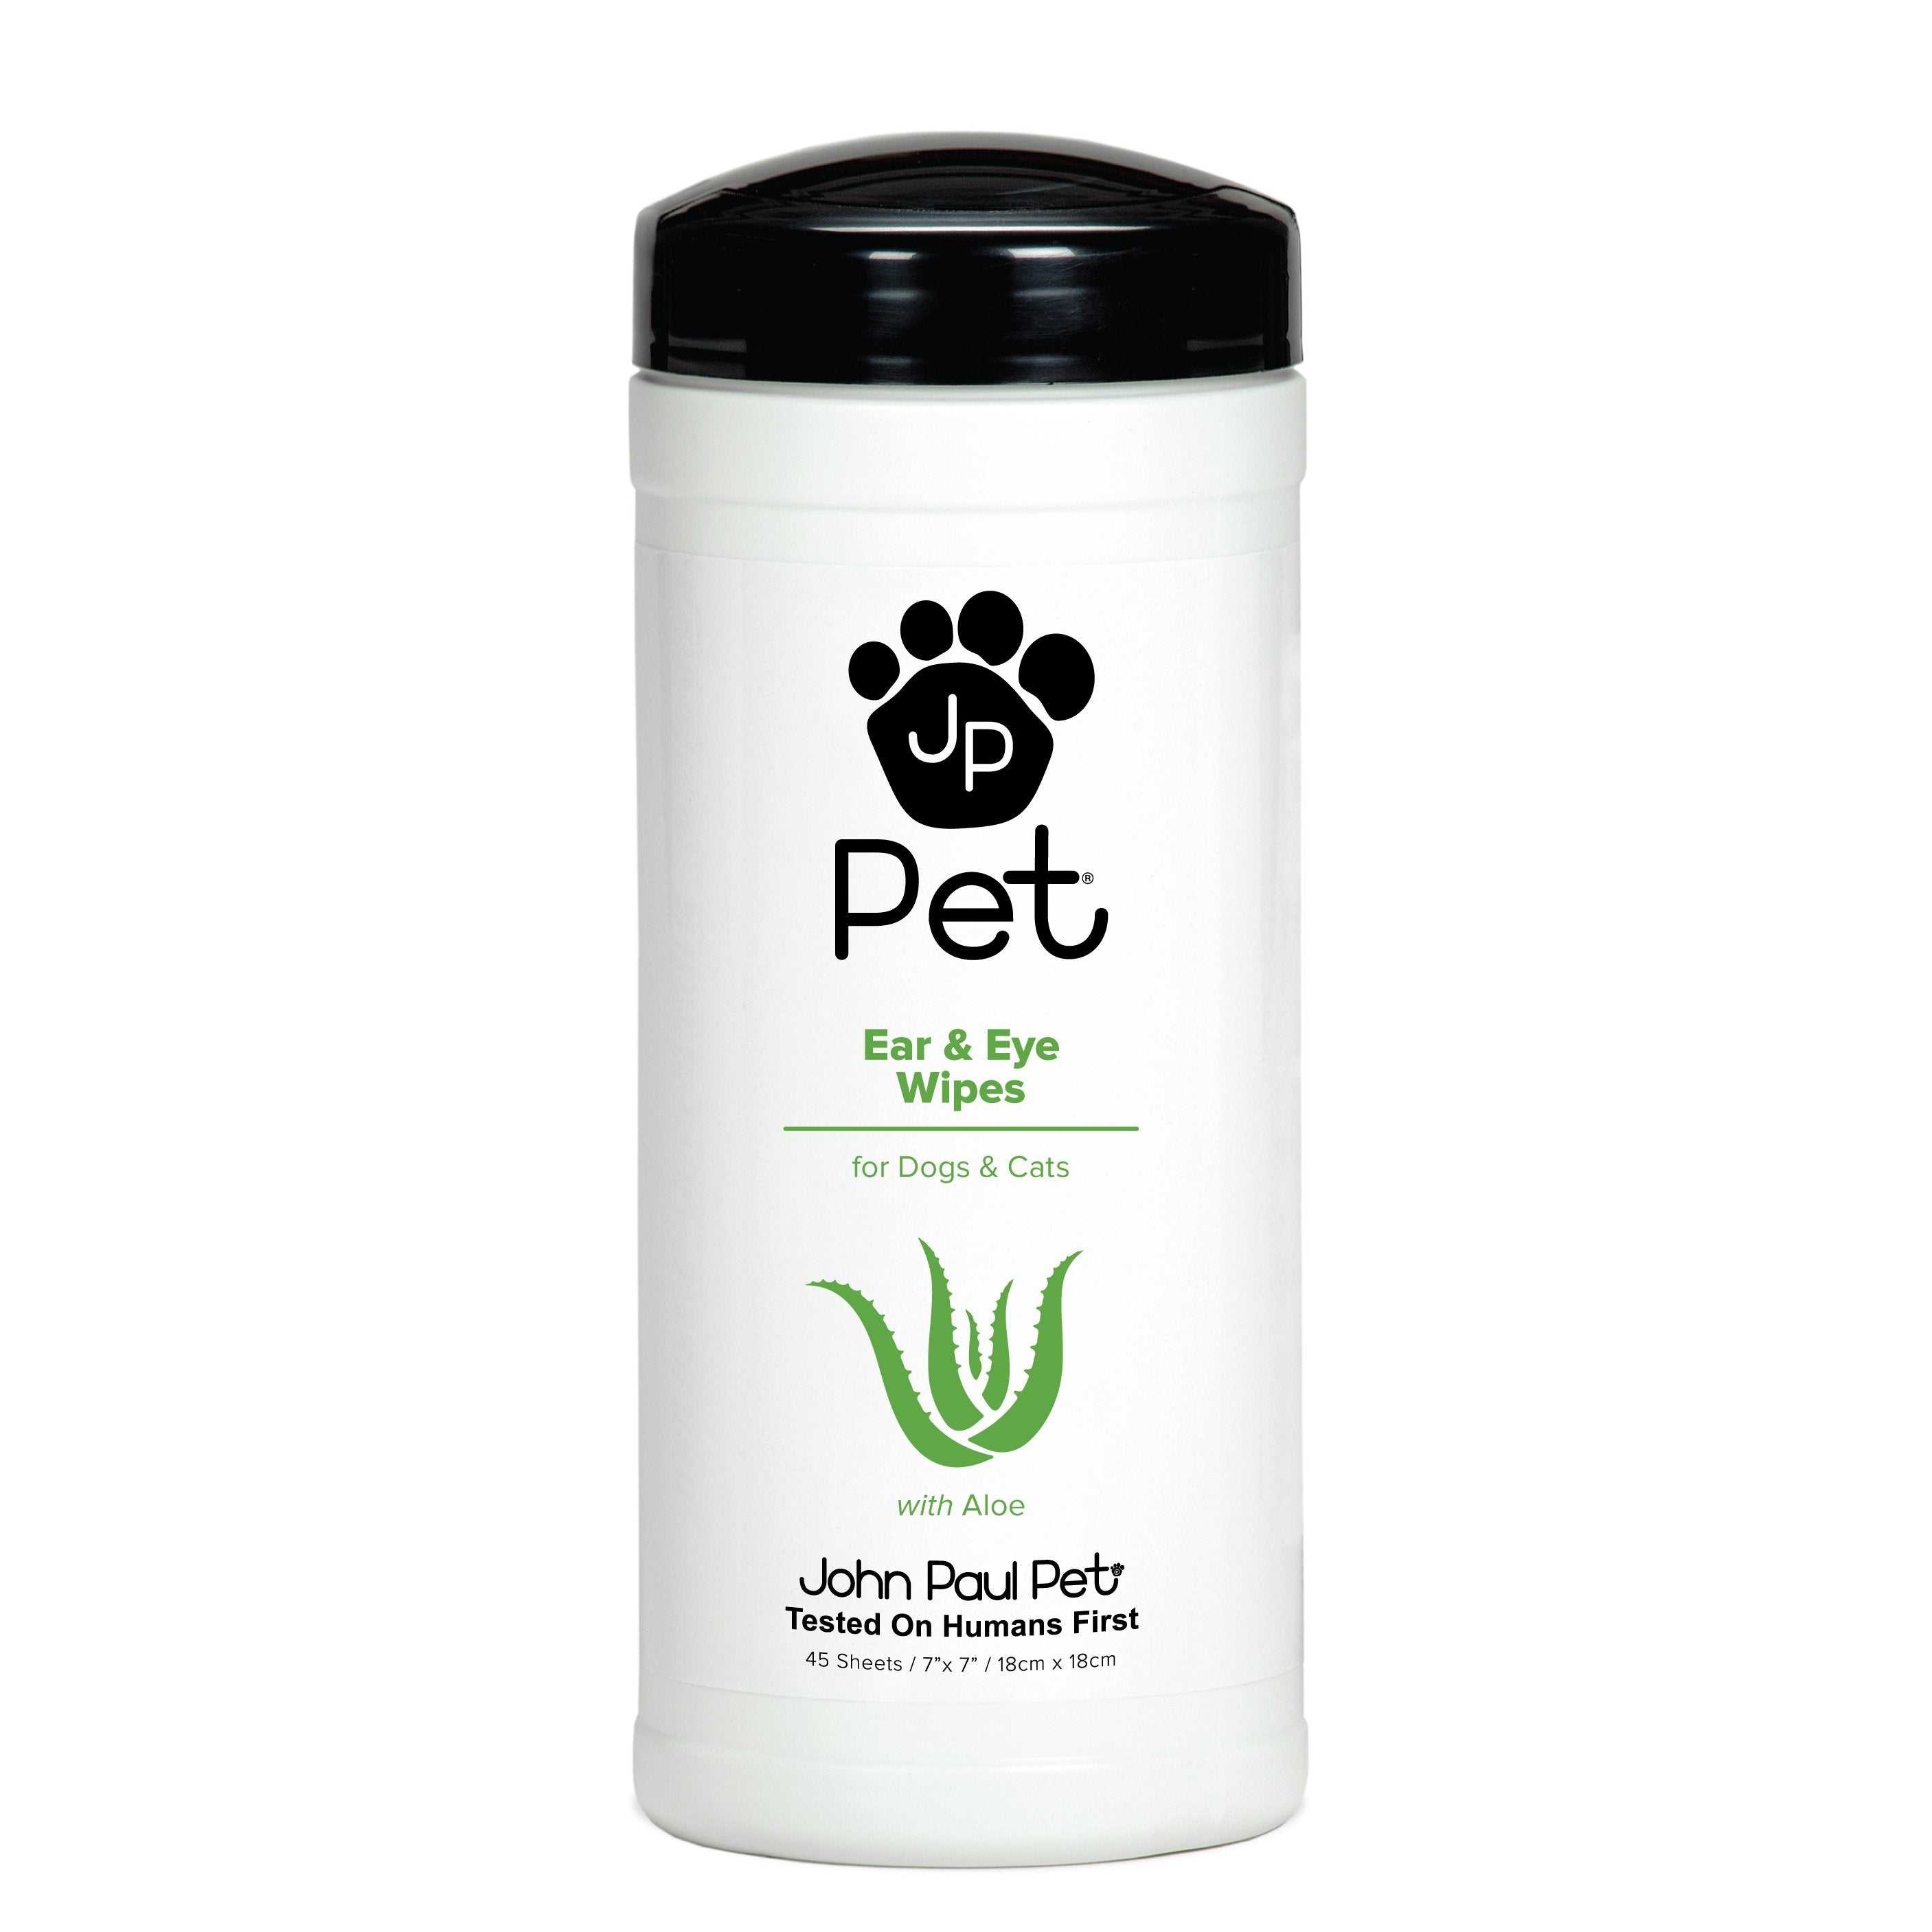 JP Pet Ear and Eye Wipes - 45 sheets